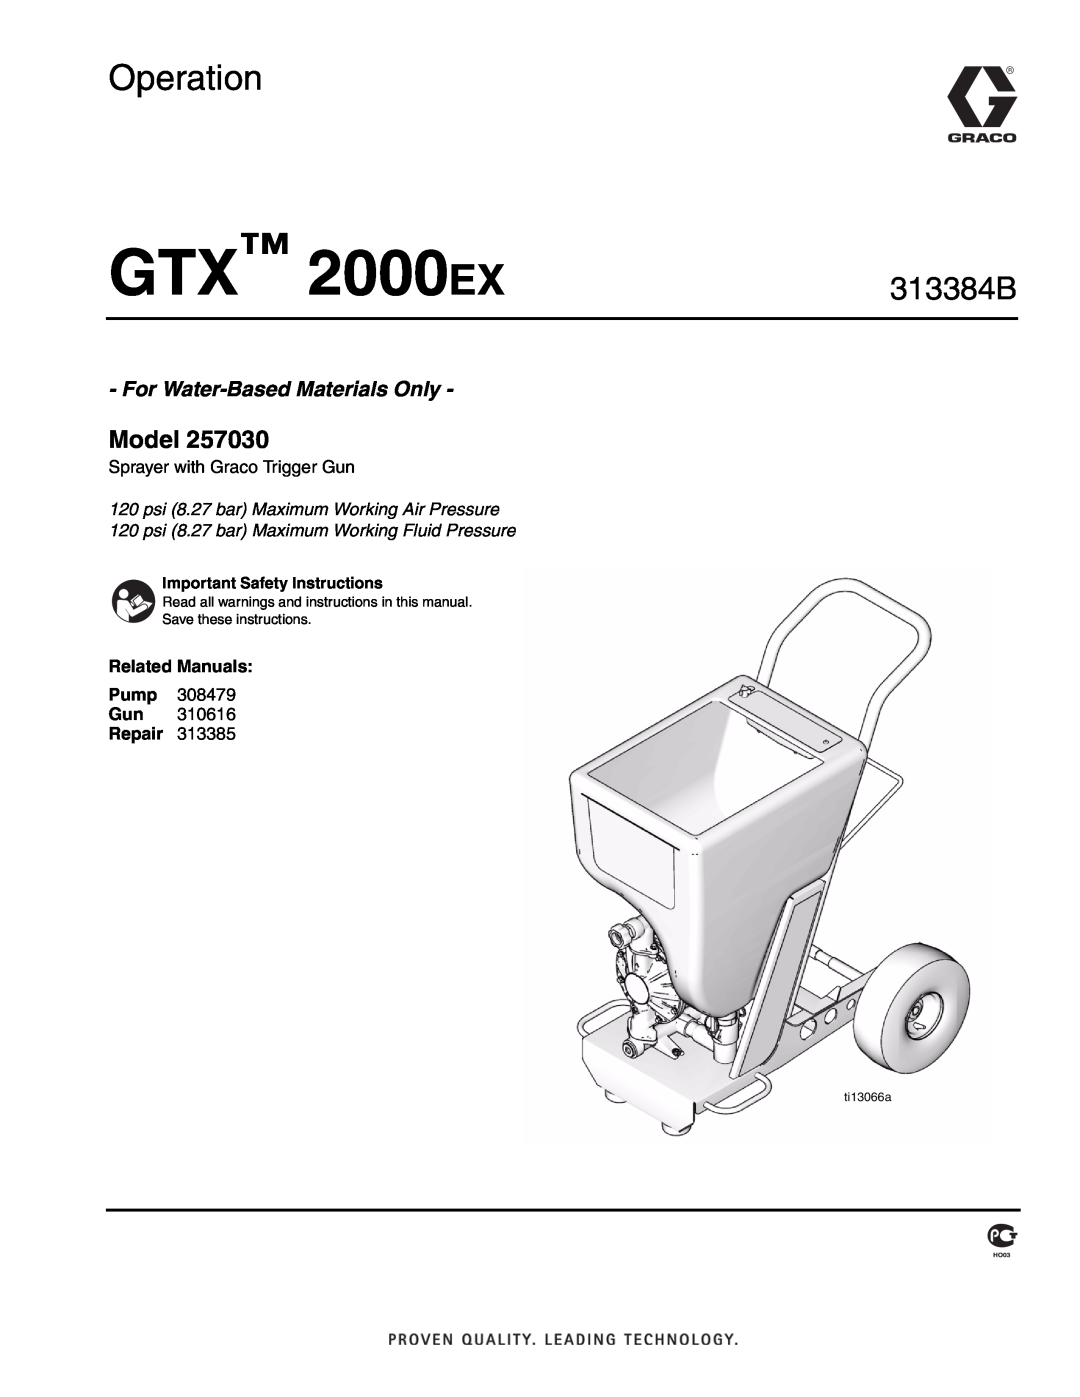 Graco Inc 257030 important safety instructions Related Manuals, Repair, GTX 2000 EX, Operation, 313384B, Model, ti13066a 